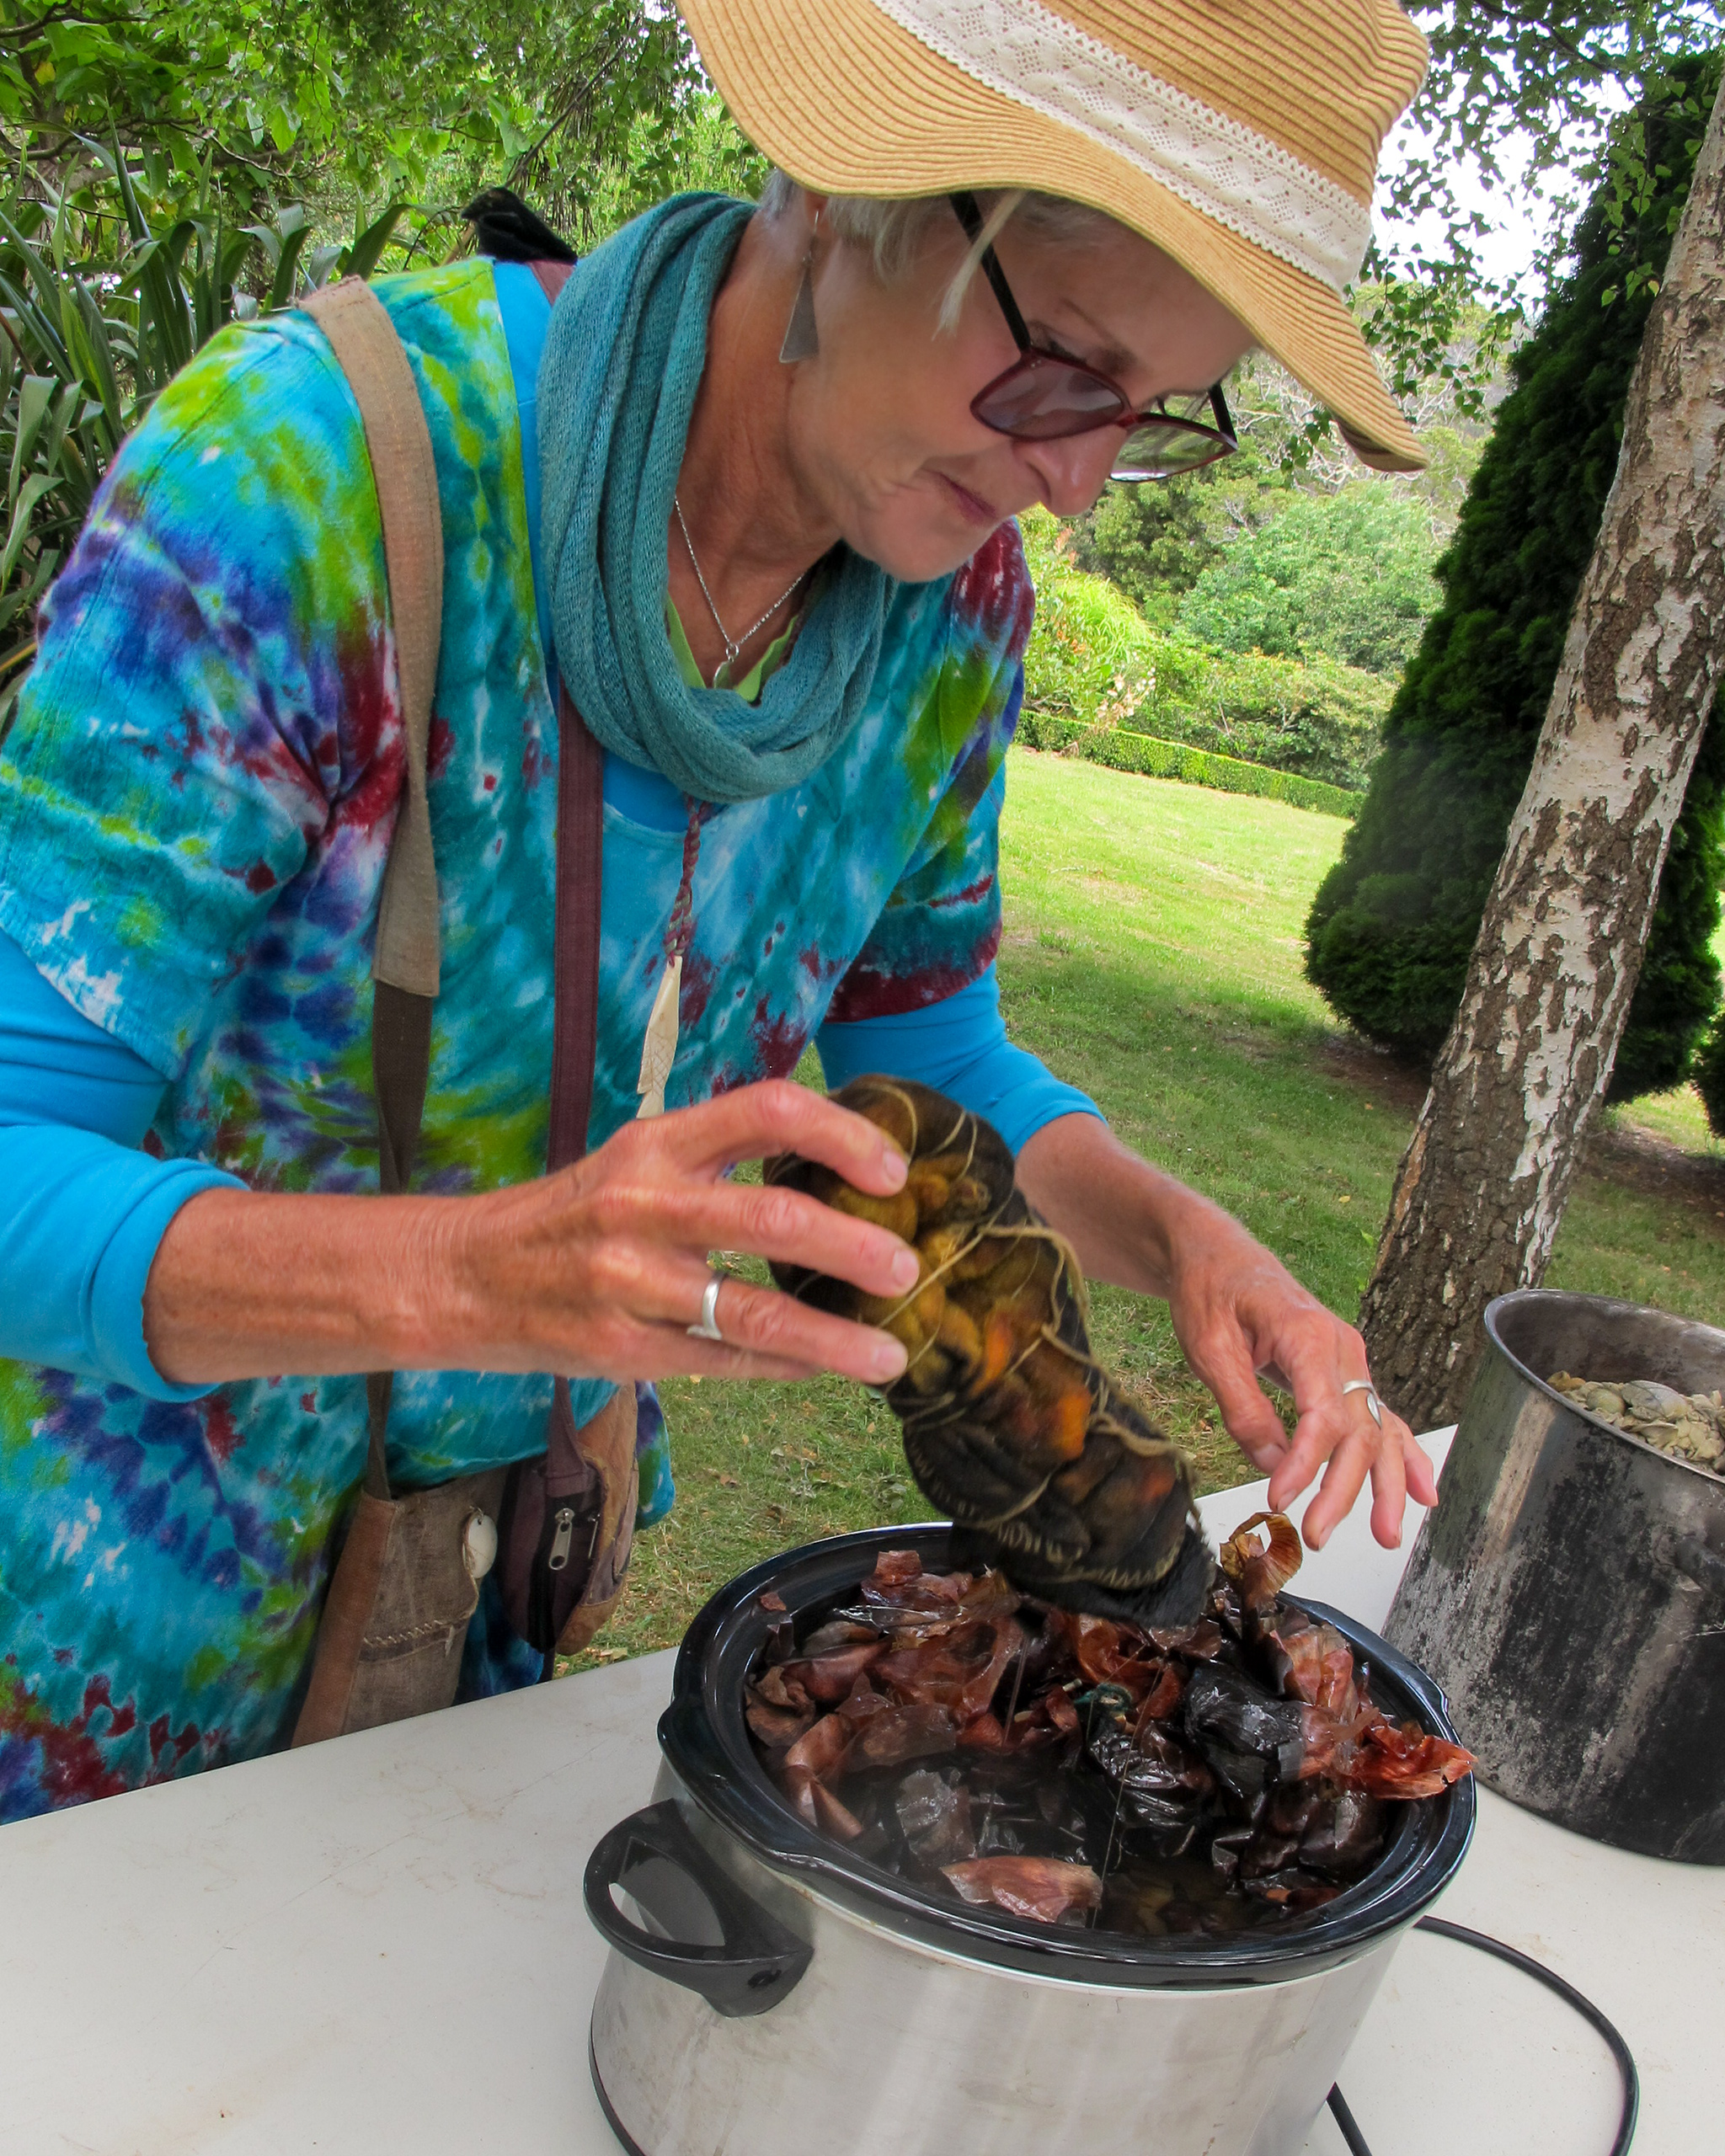 The image shows textile artist Aujke Boonstra dyeing yearn for the Textile Art Retreat Found, Collected, Dyed, Stitched with Textile Artist Aujke Boonstra Art Trails Tasmania for her workshop at the Tin Dragon Trails Cottages